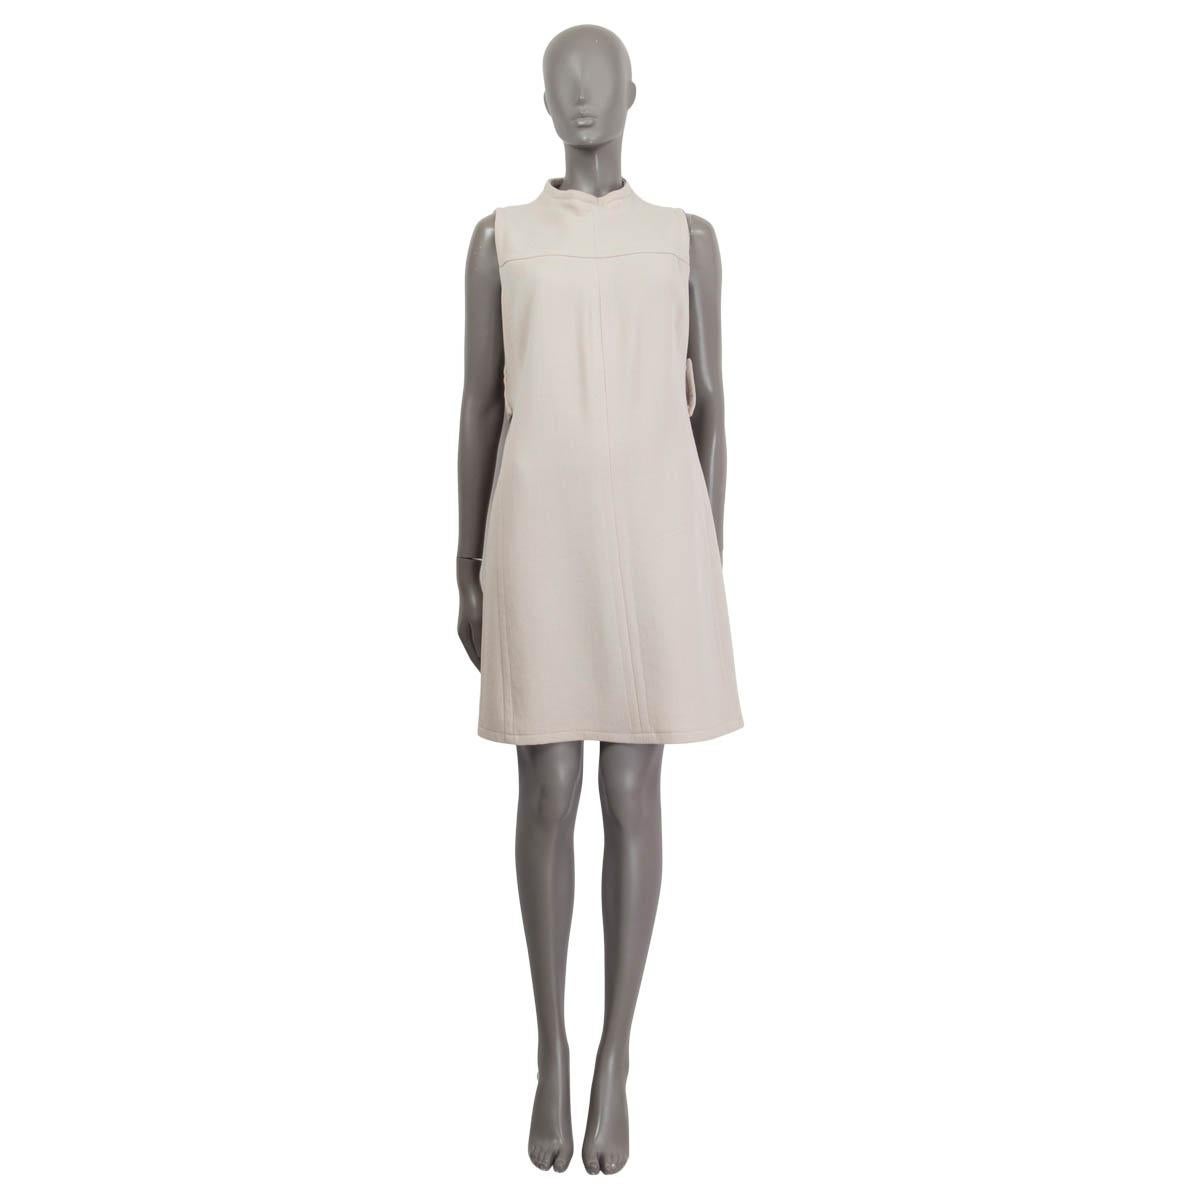 100% authentic Prada sleeveless dress in beige virgin wool (100%). Features a belt on the back and opens with a concealed zipper and a hook on the back. Unlined. Has been worn and is in excellent condition.

Measurements
Tag Size	46
Size	XL
Shoulder